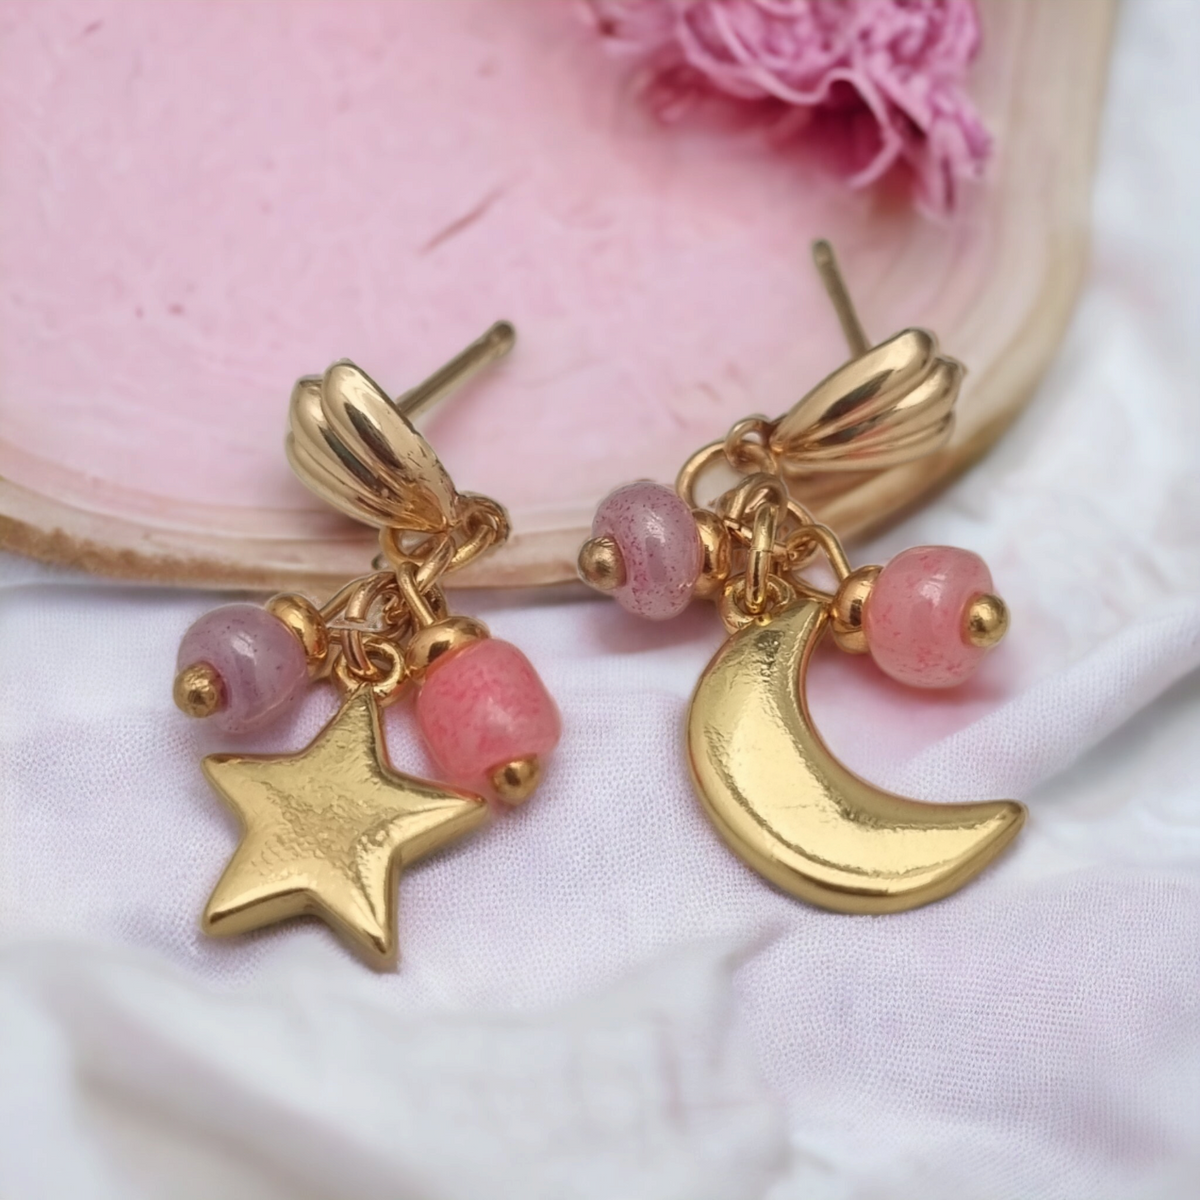 Tiny Gold Mermaid Studs with Crescent Moon and Star Earrings